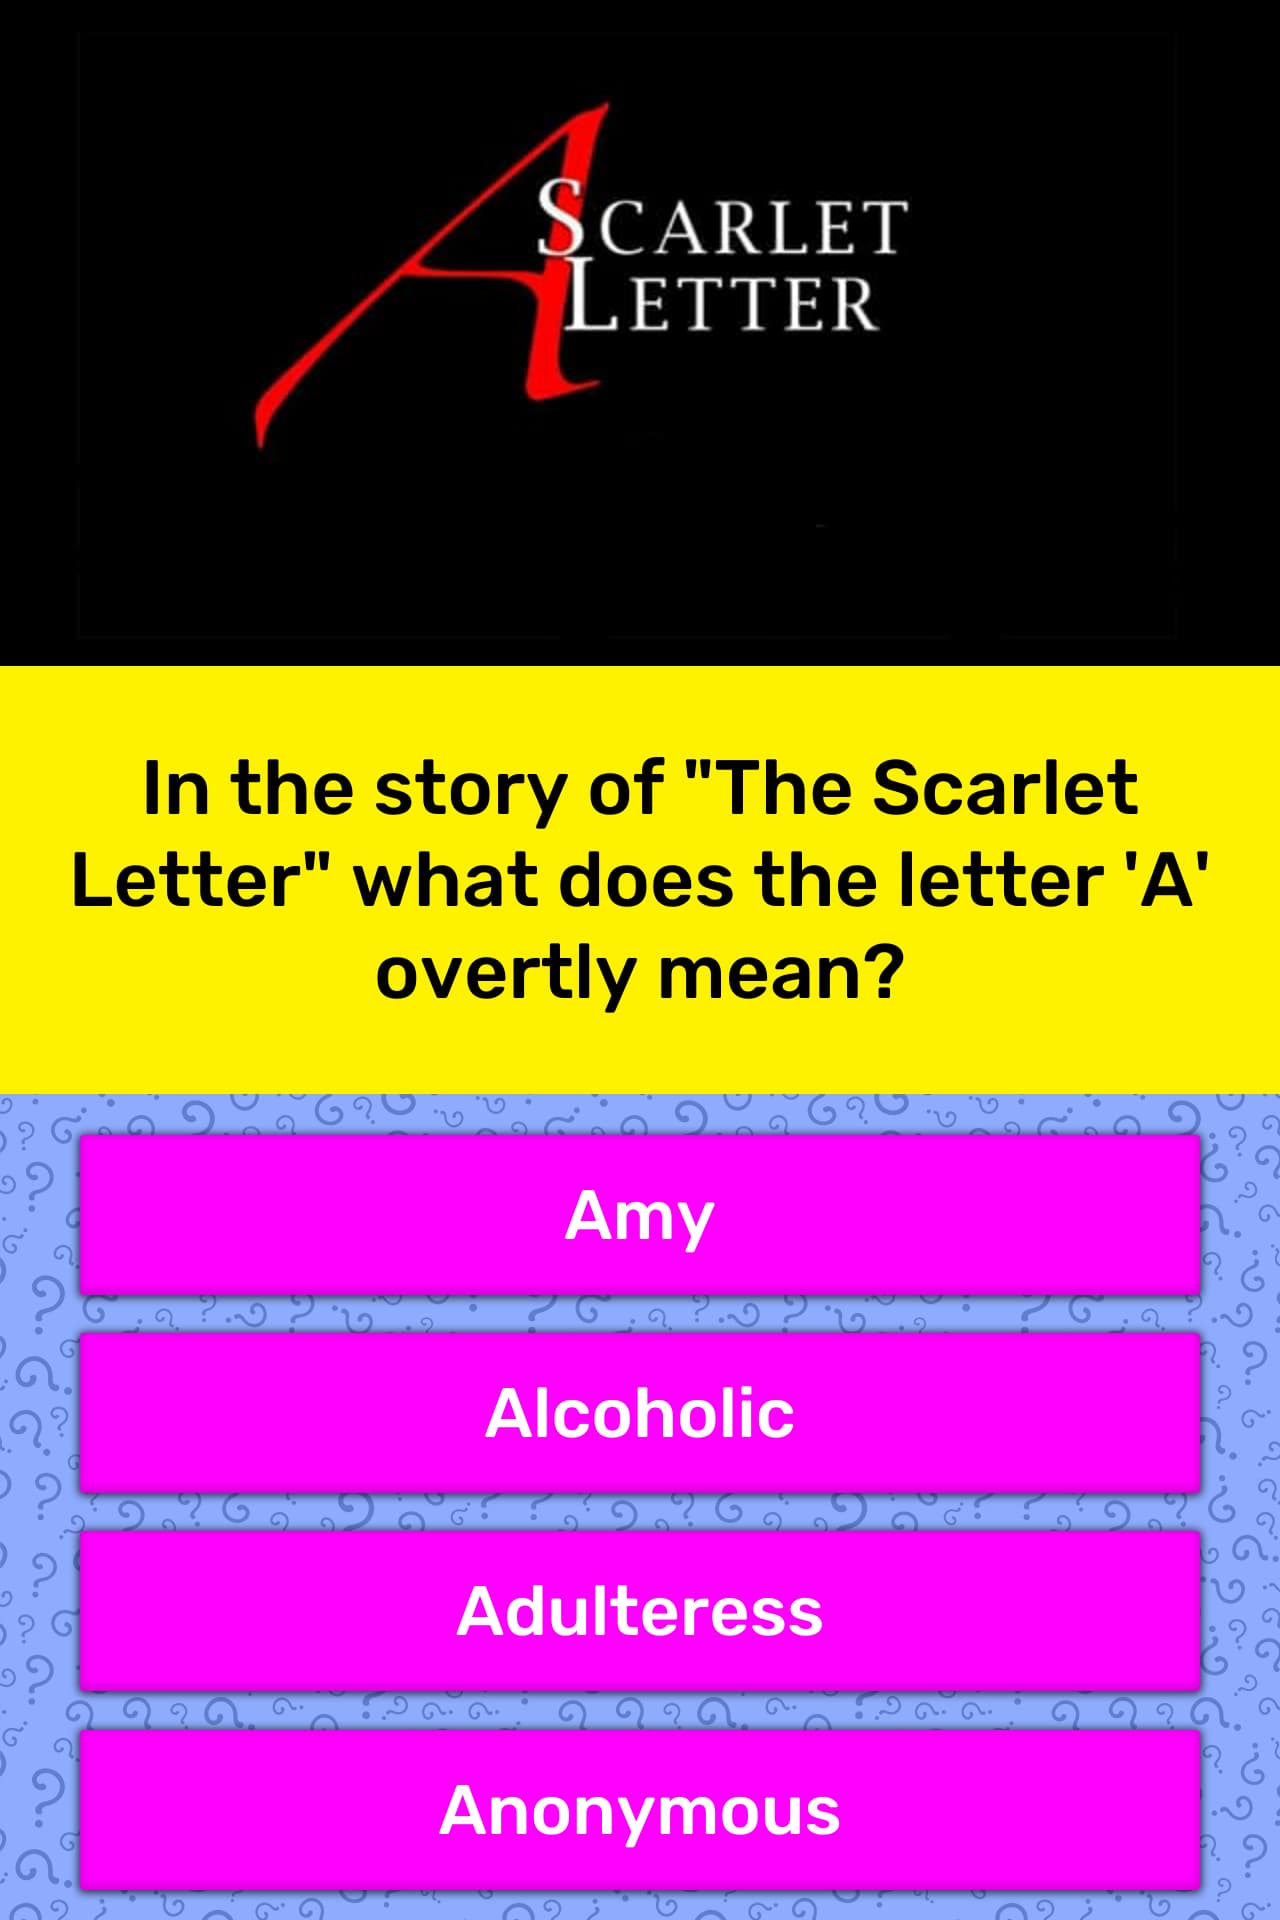 in the scarlet letter, why was hester prynne required to wear a scarlet a on her dress?